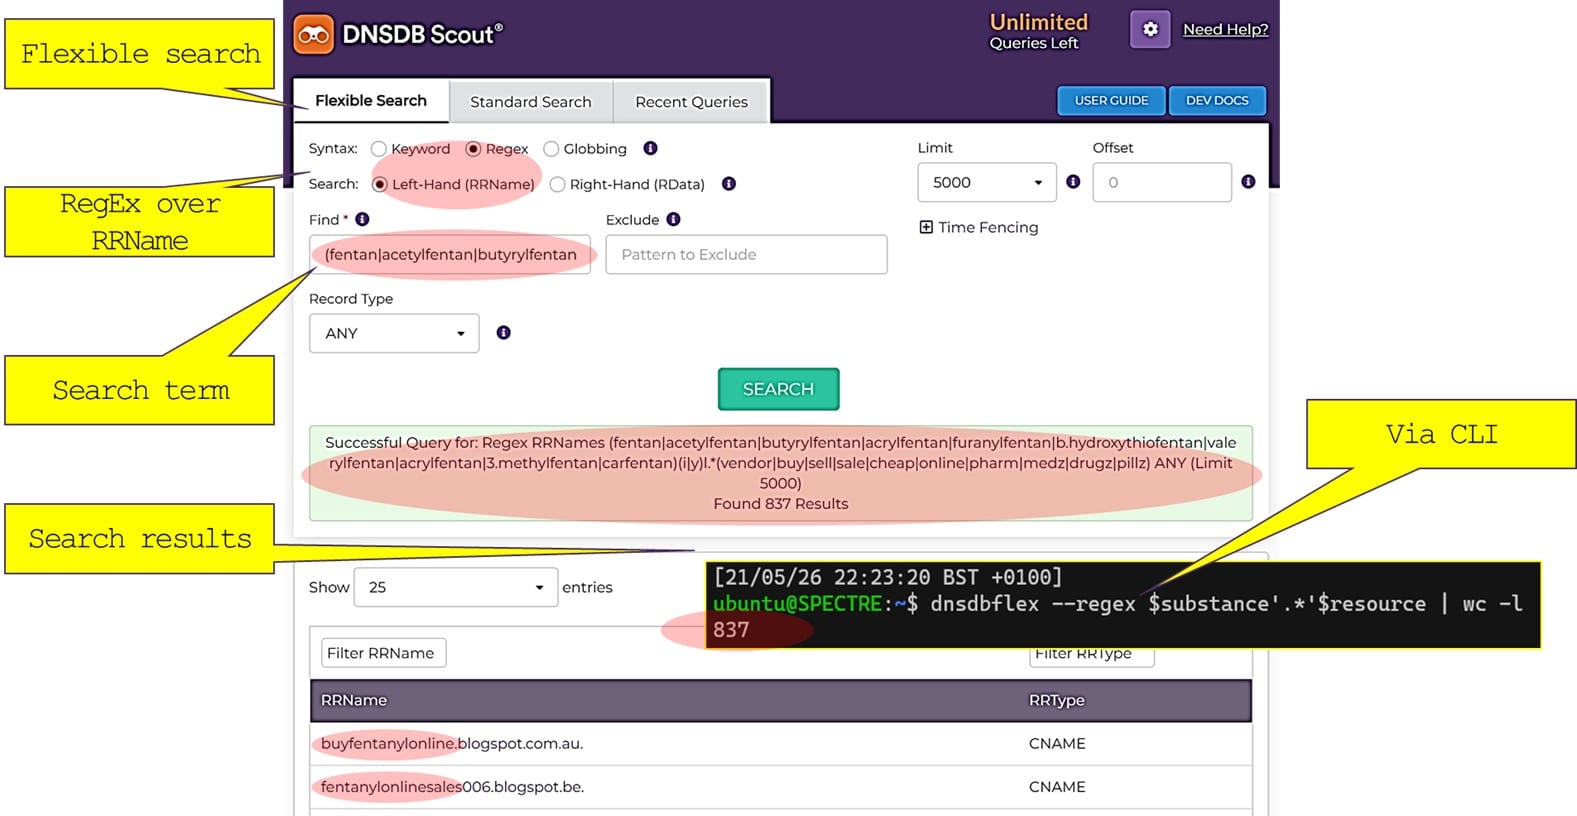 Screenshot of the same Flexible Search in DNSDB Scout